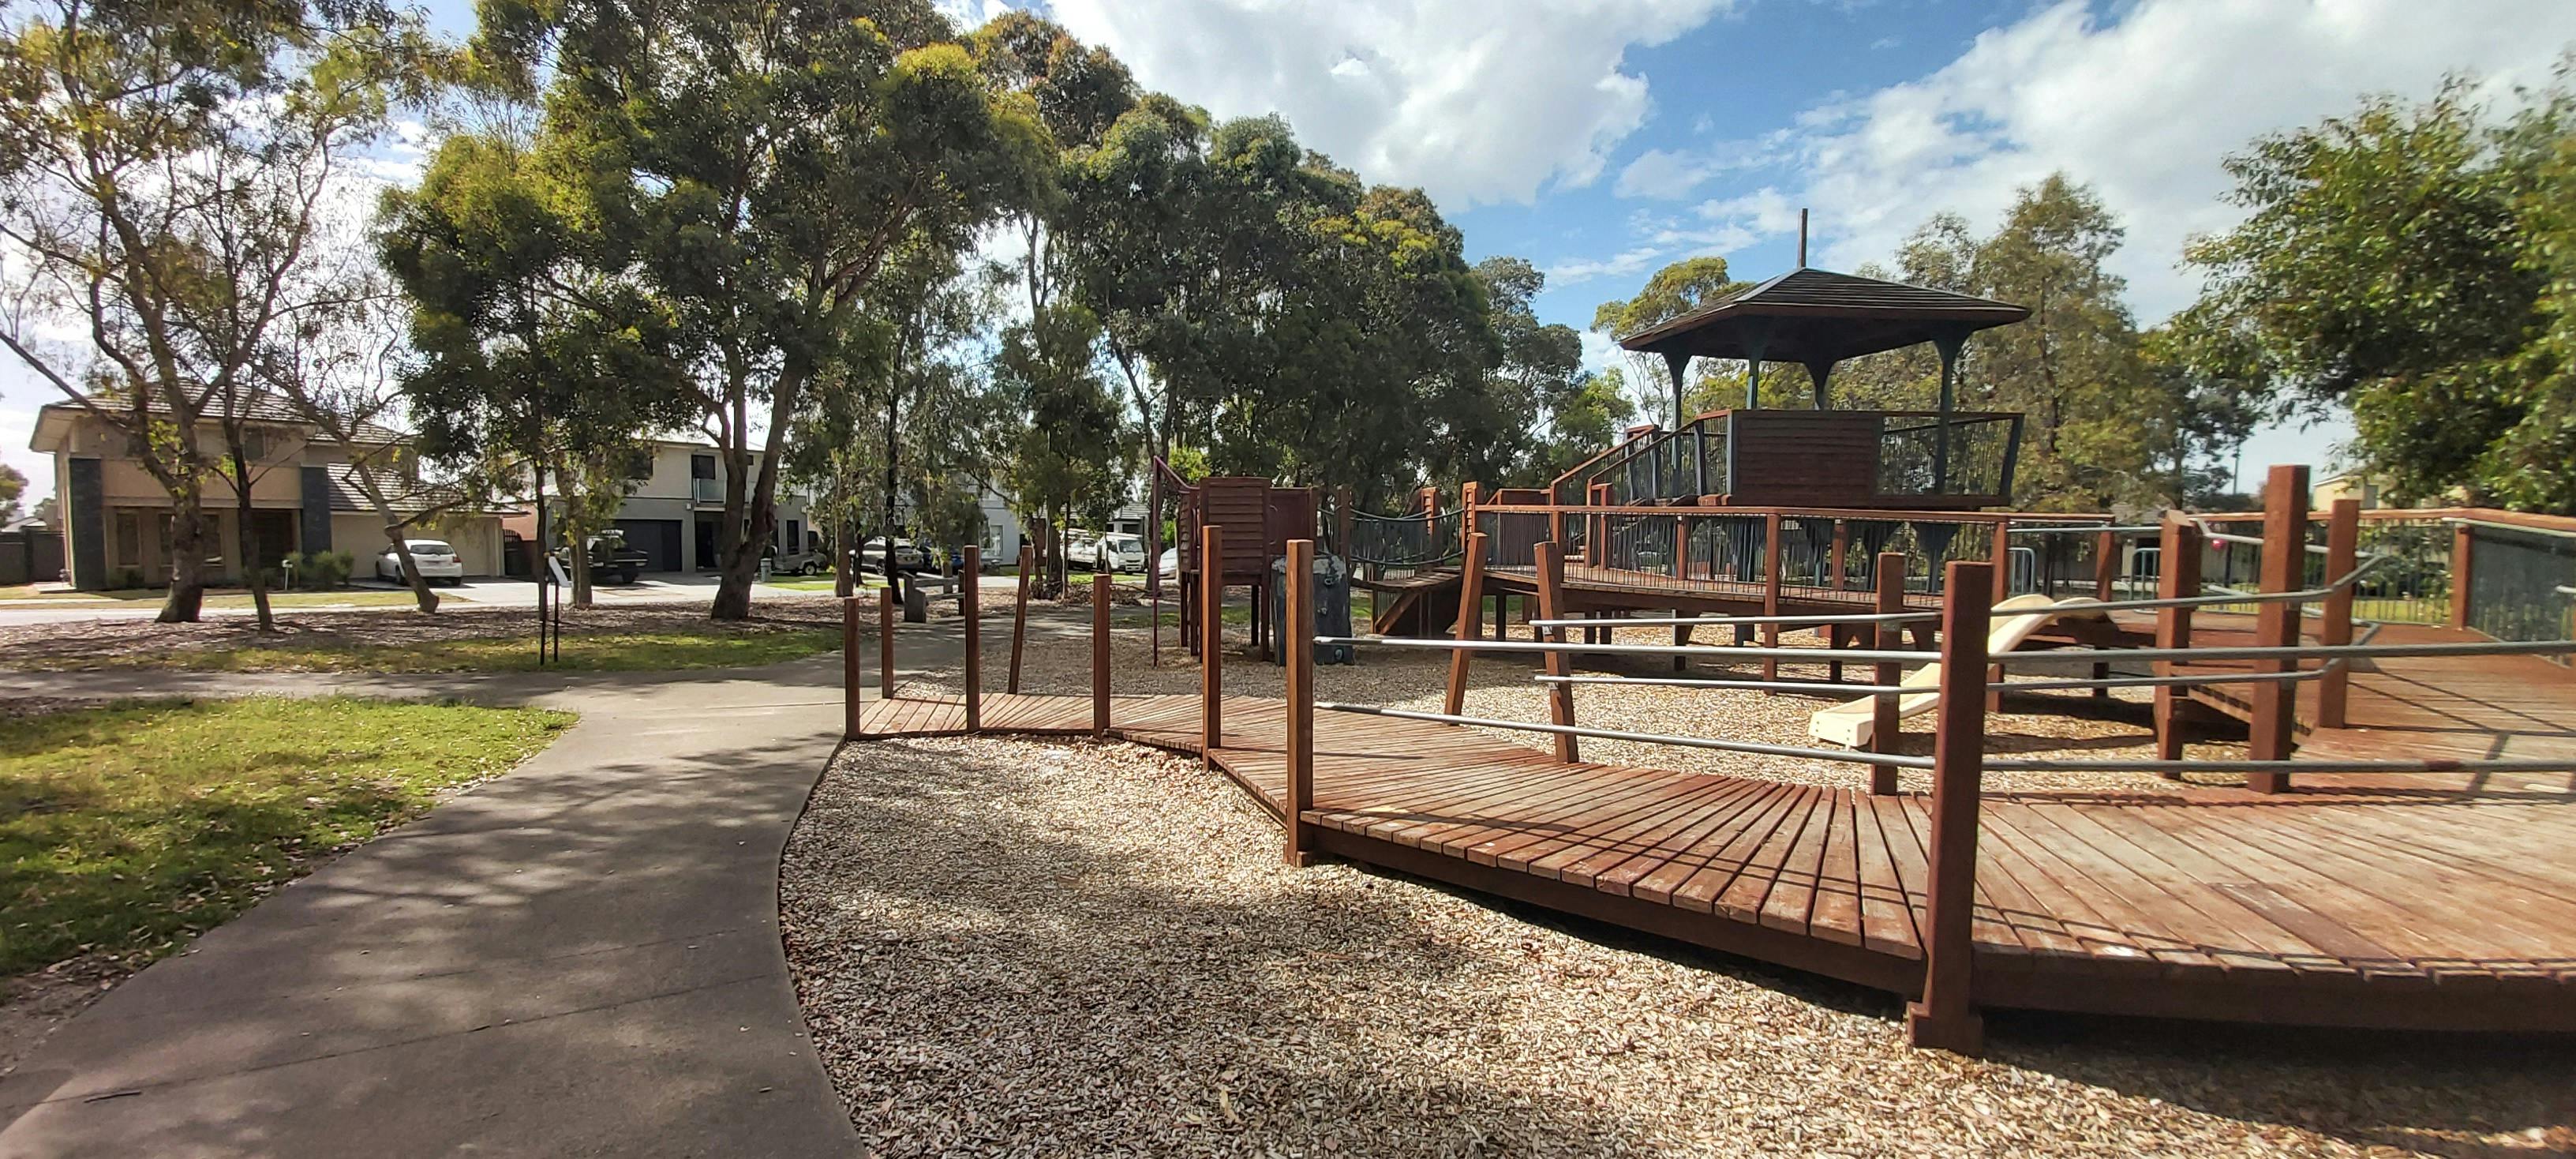 Existing playspace ramp and path